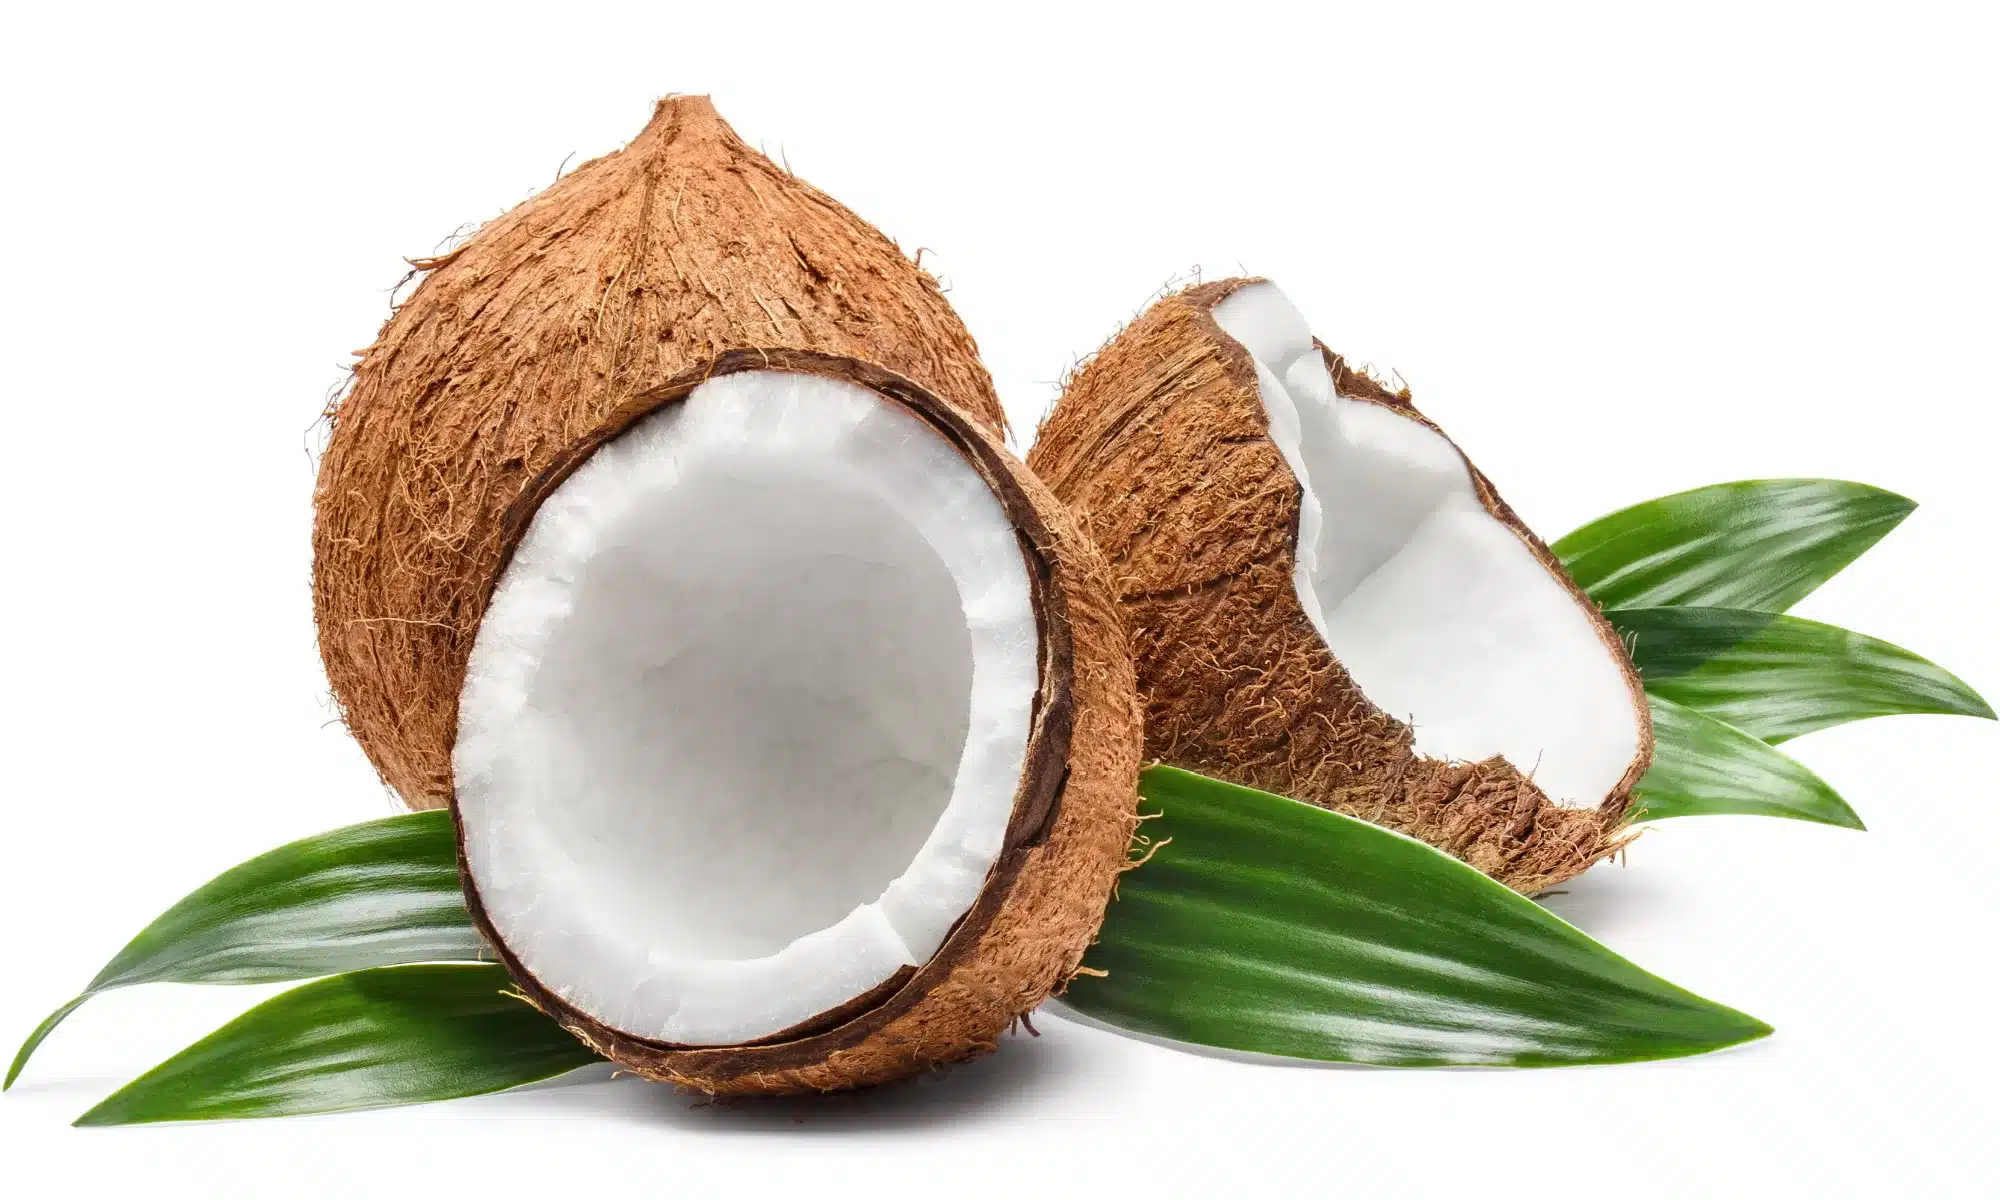 What is the health benefit of eating coconut?